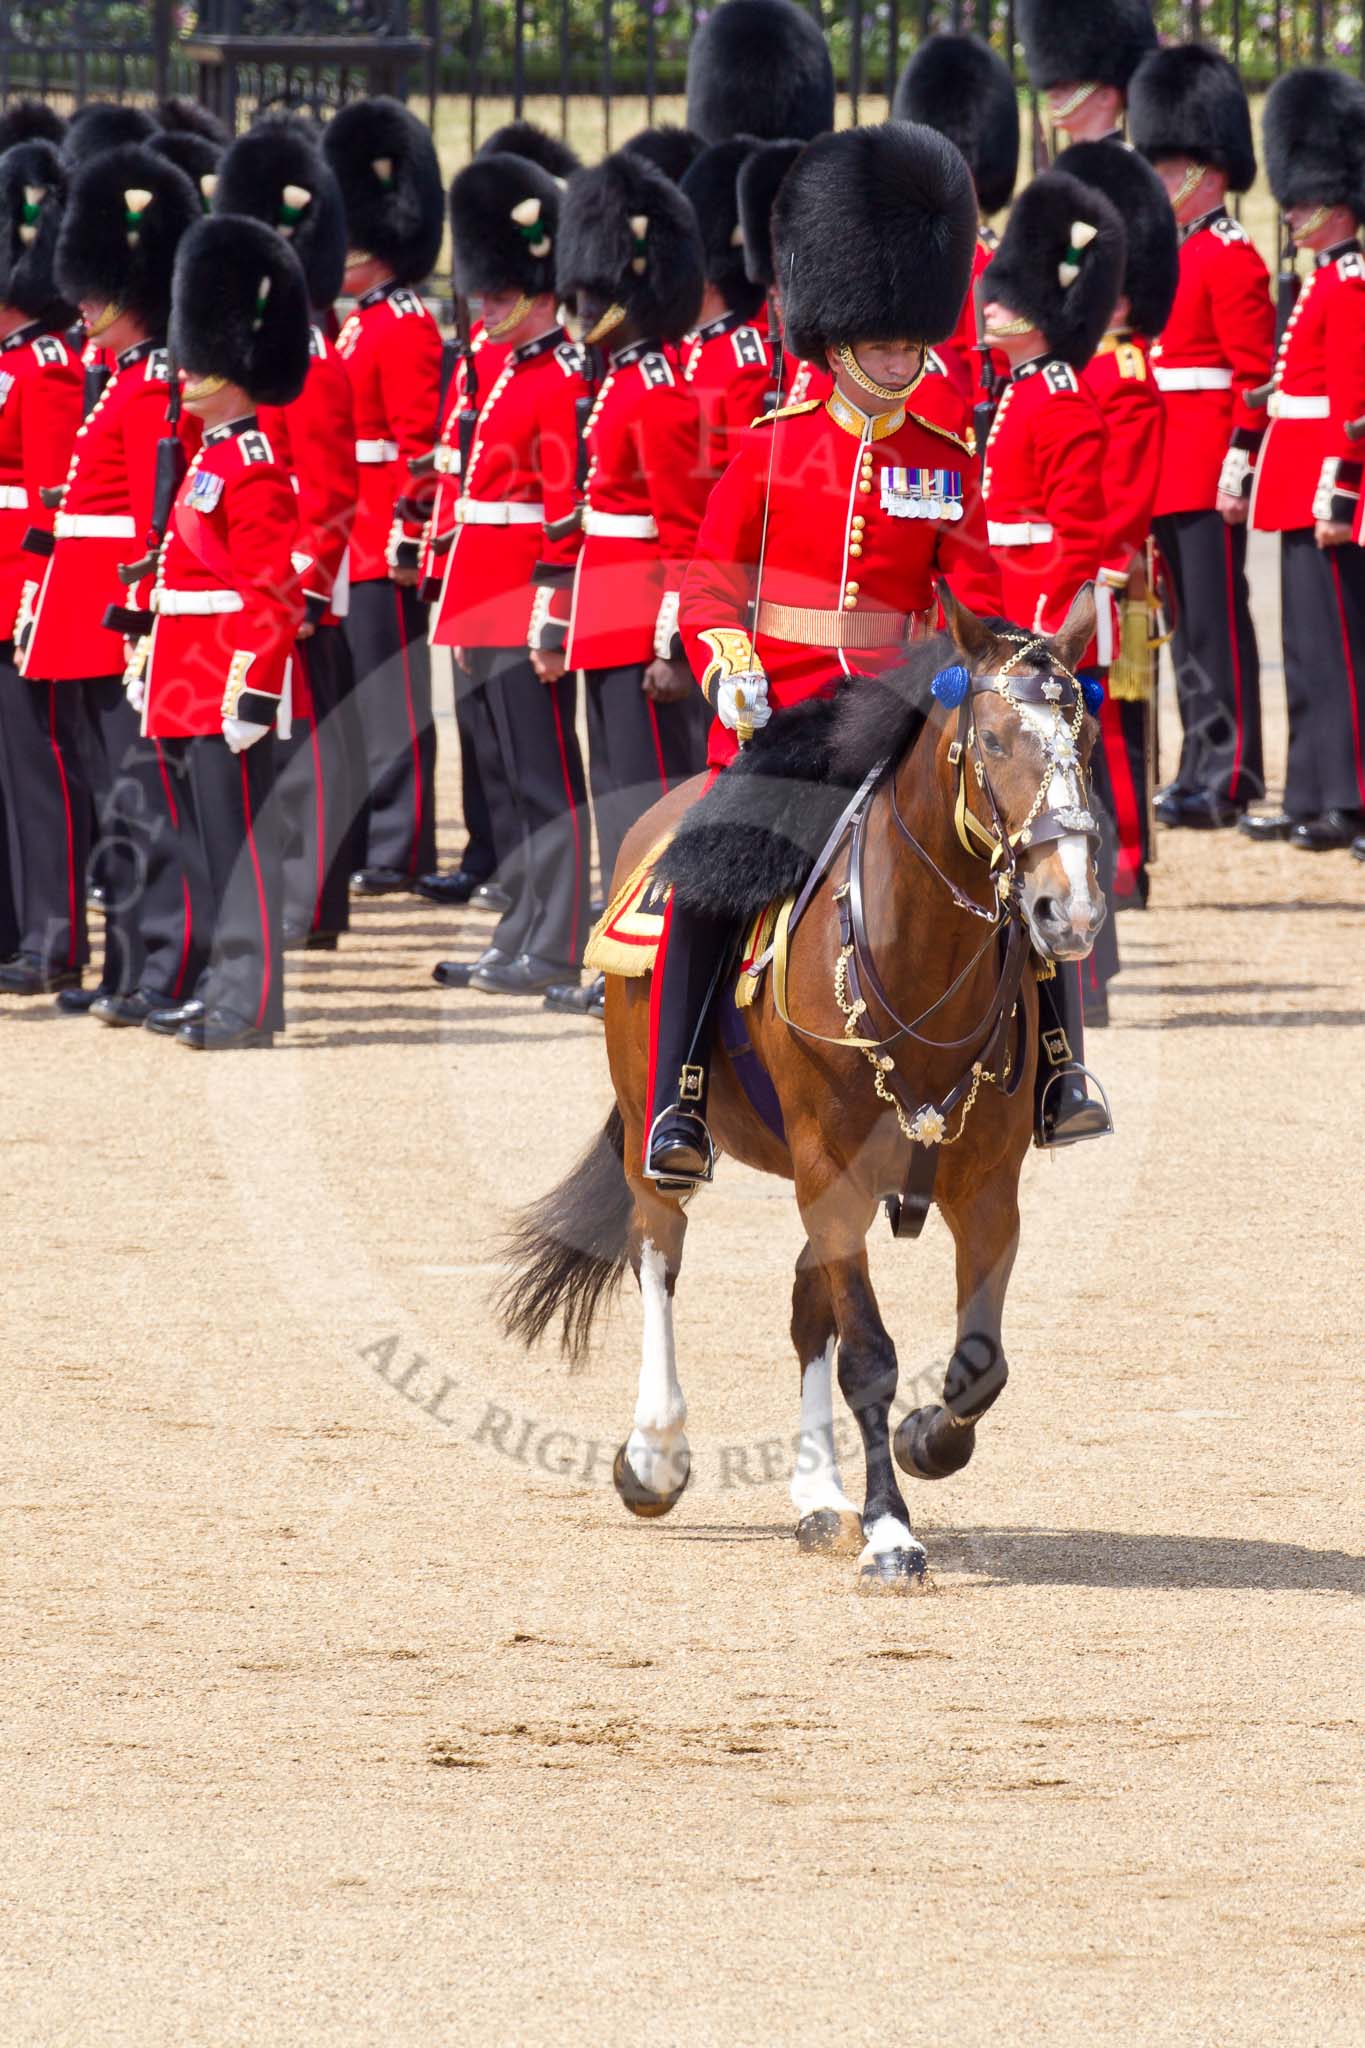 The Colonel's Review 2011: The Field Officer, Lieutenant Colonel L P M Jopp, riding 'Burniston', about to ask permission to march off..
Horse Guards Parade, Westminster,
London SW1,

United Kingdom,
on 04 June 2011 at 12:04, image #280